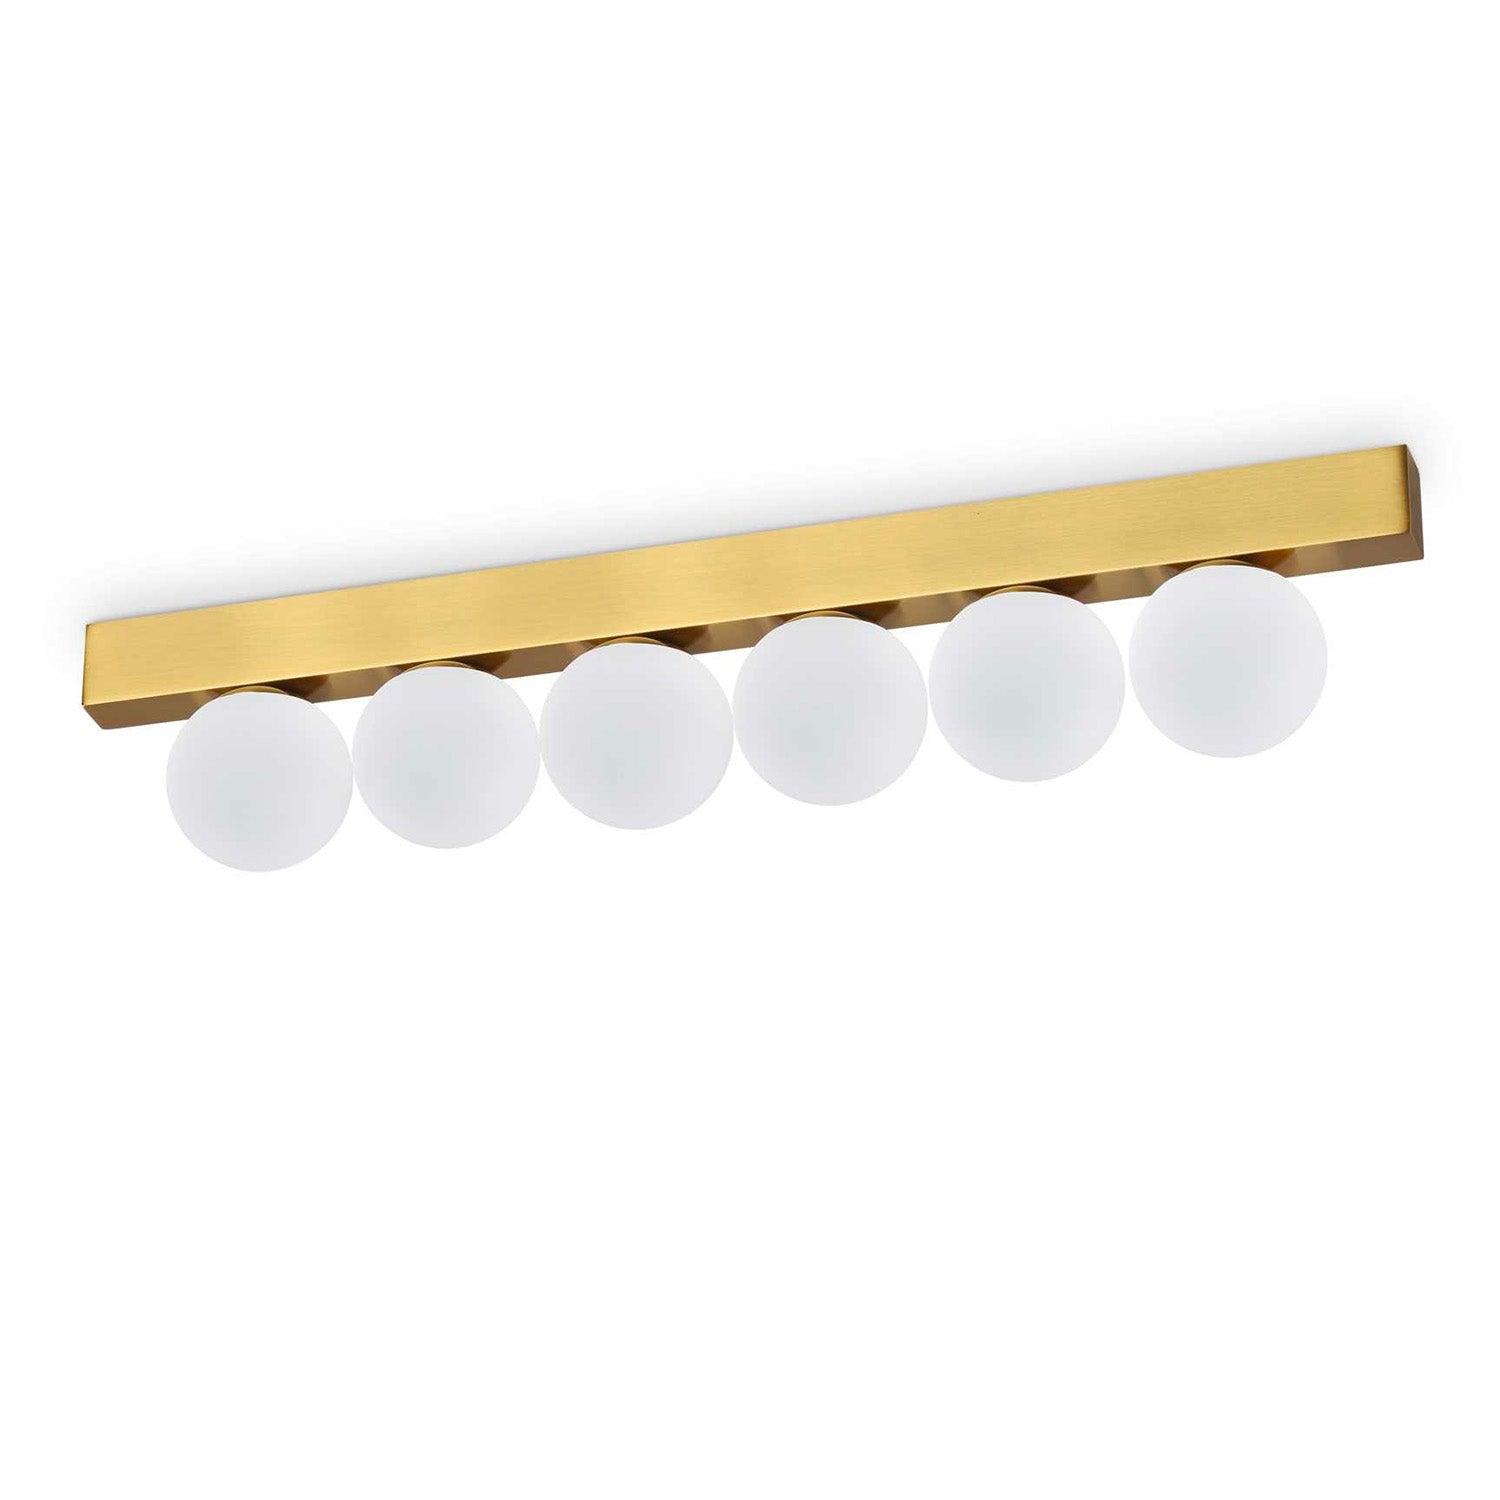 PING PONG - Glass ball track ceiling light